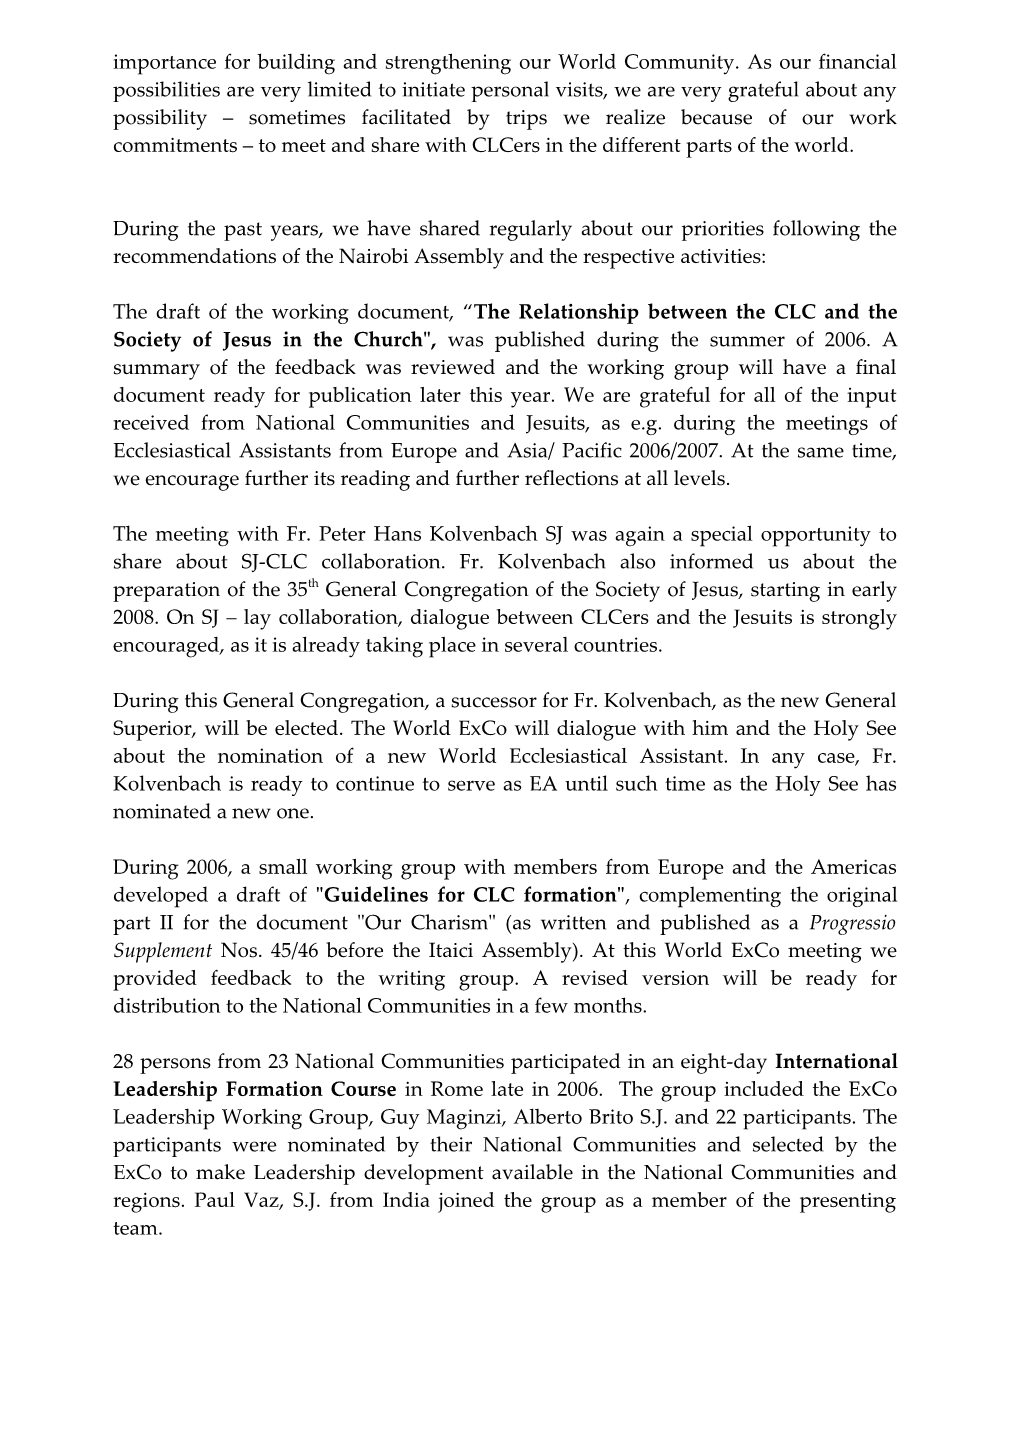 No. 134, May 2007 Letter of Communication Between the Executive Council and the World